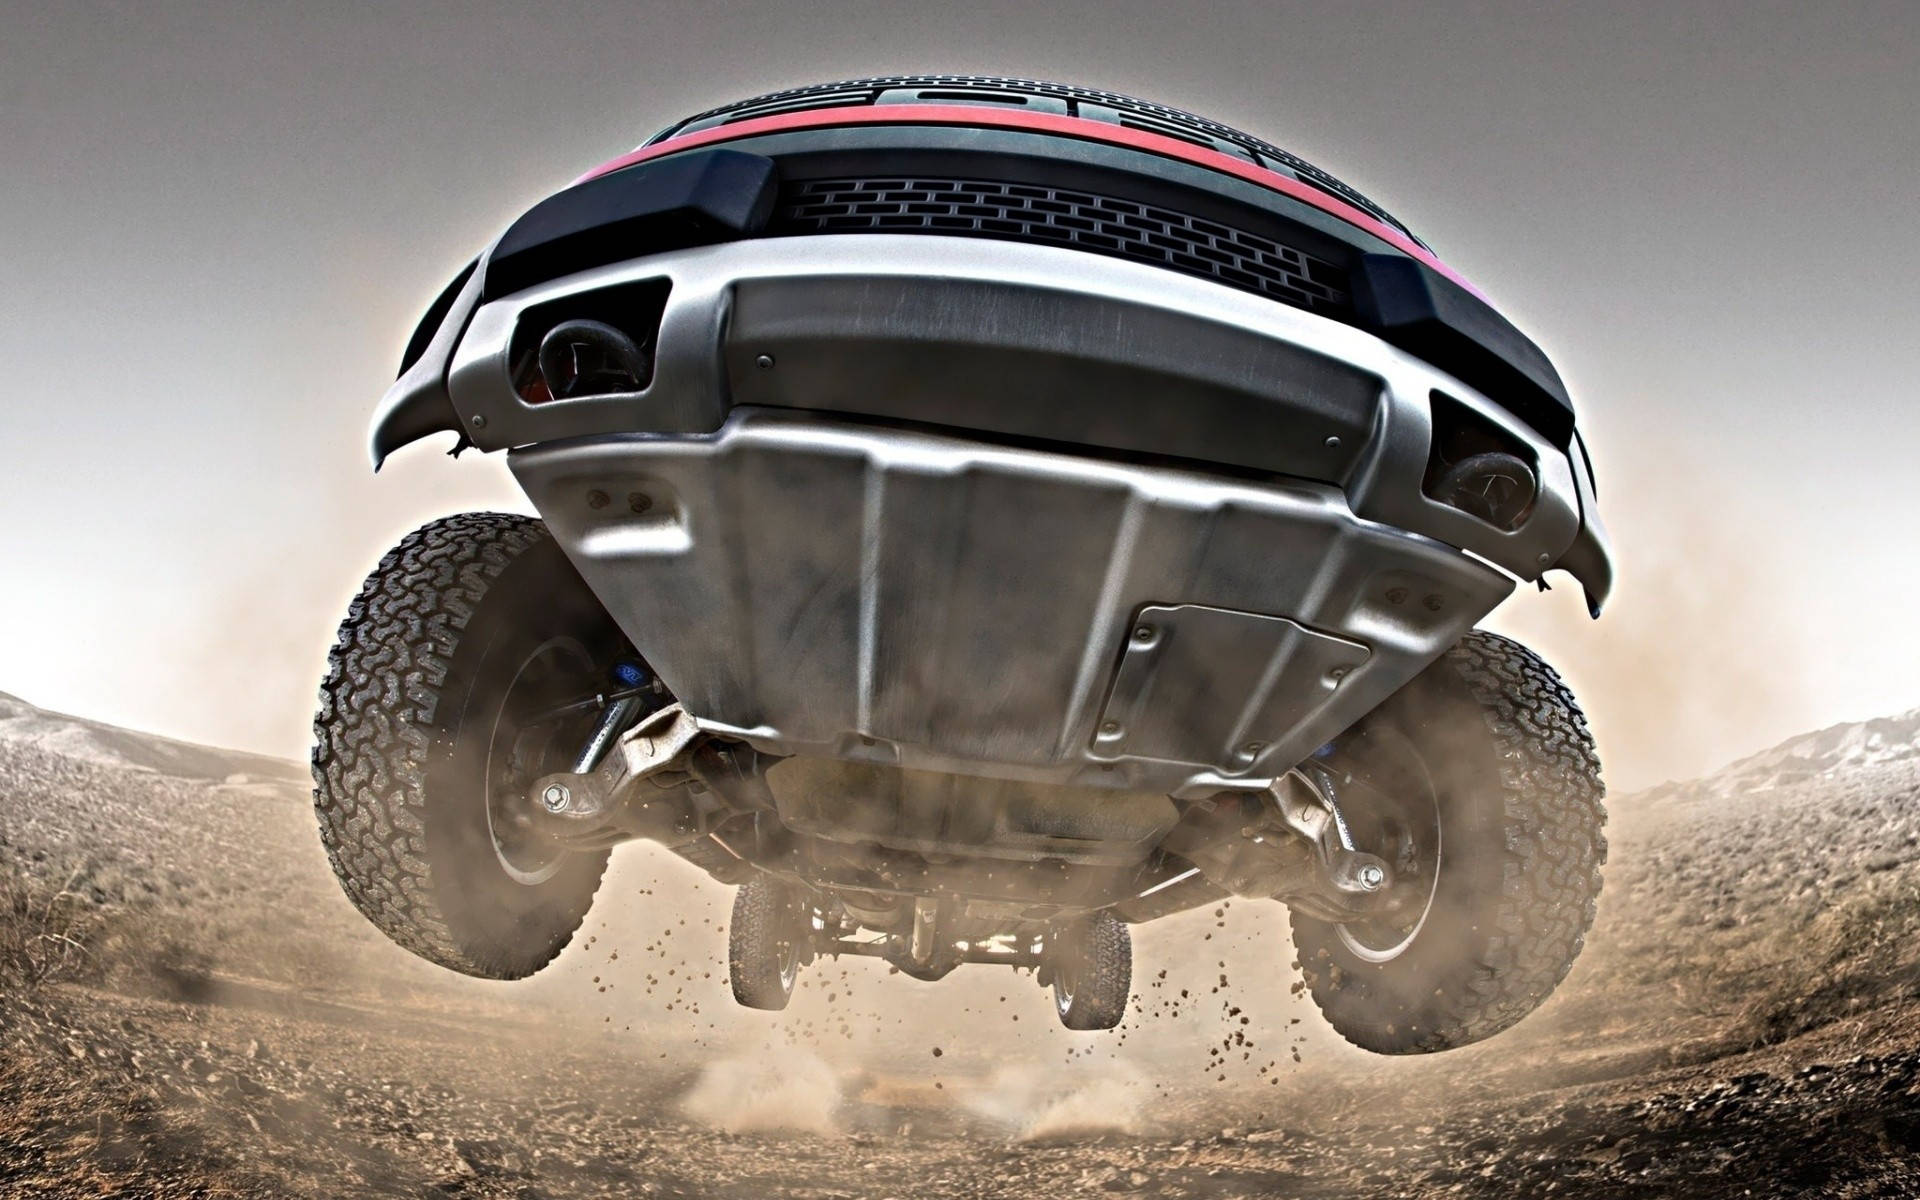 Caption: Dominating Engineering - Ford Raptor Under Chassis View Background